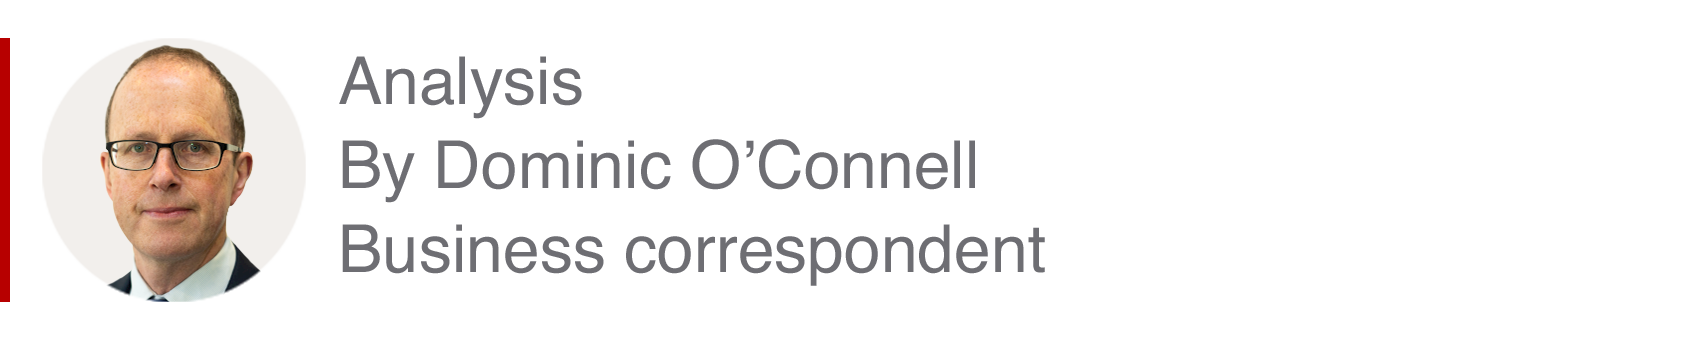 Analysis box by Dominic O`Connell, business correspondent